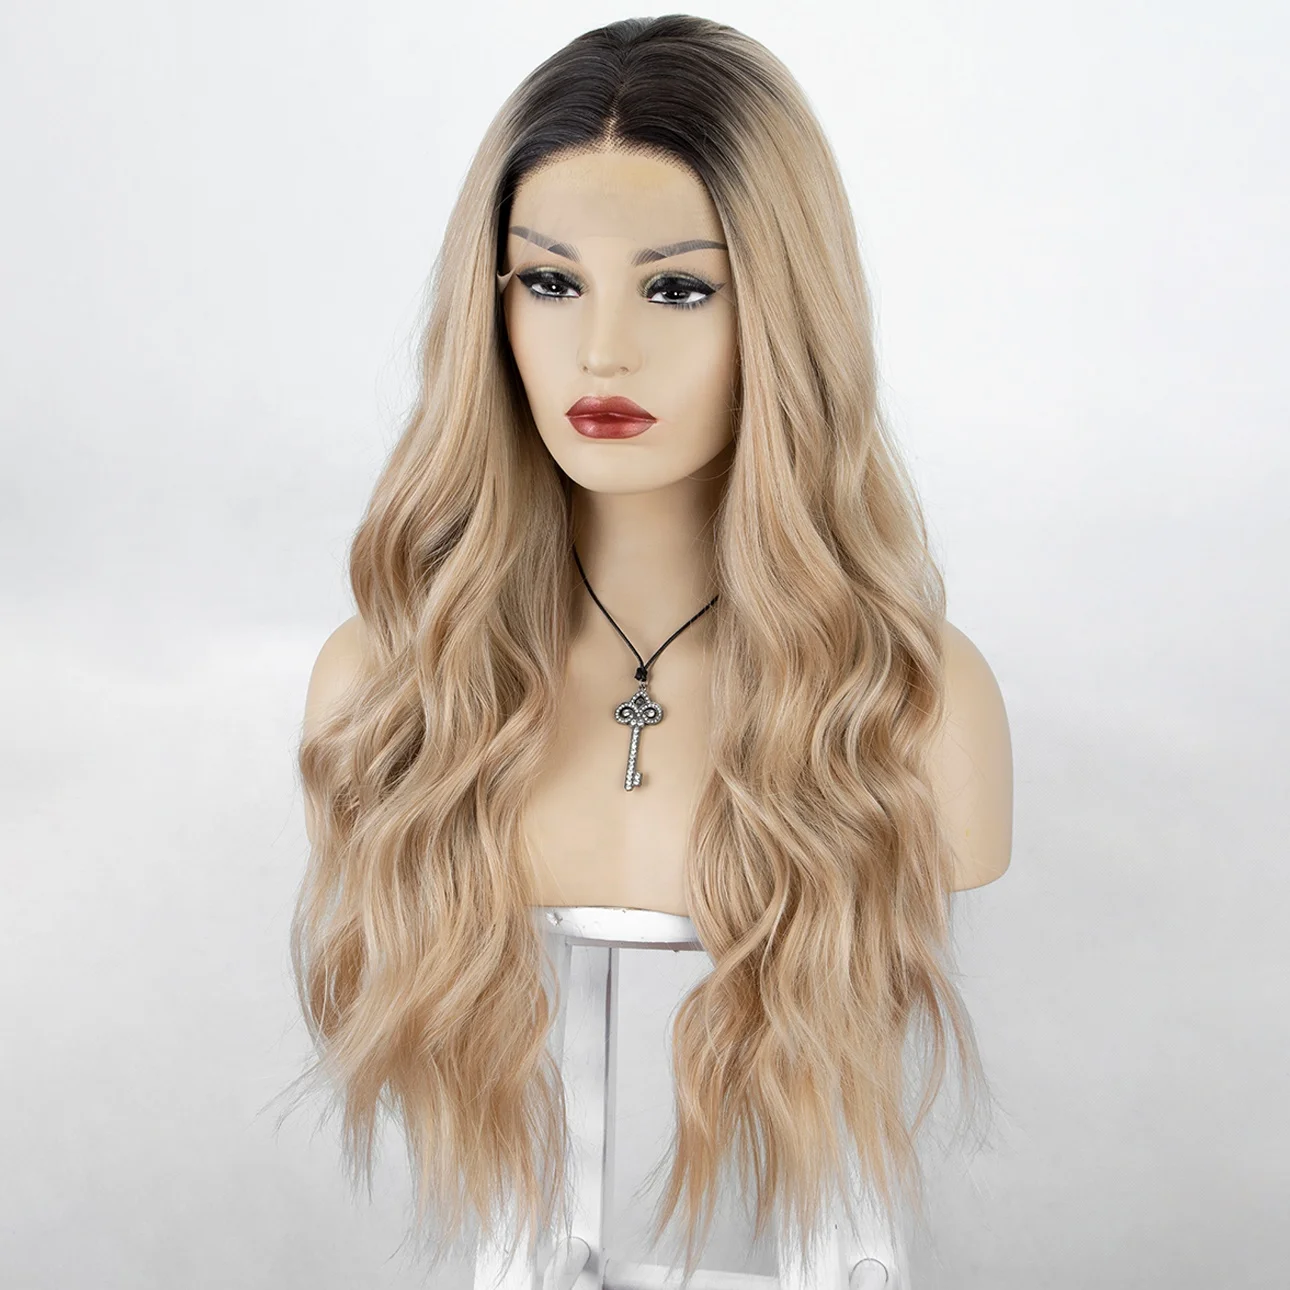 

Aliblisswig 24" Long Wavy Middle Parting Synthetic Lace Front Wig Glueless Dark Root Ombre Blonde Lace Front Synthetic Hair Wigs, 2 tone blonde ombre lace front wigs